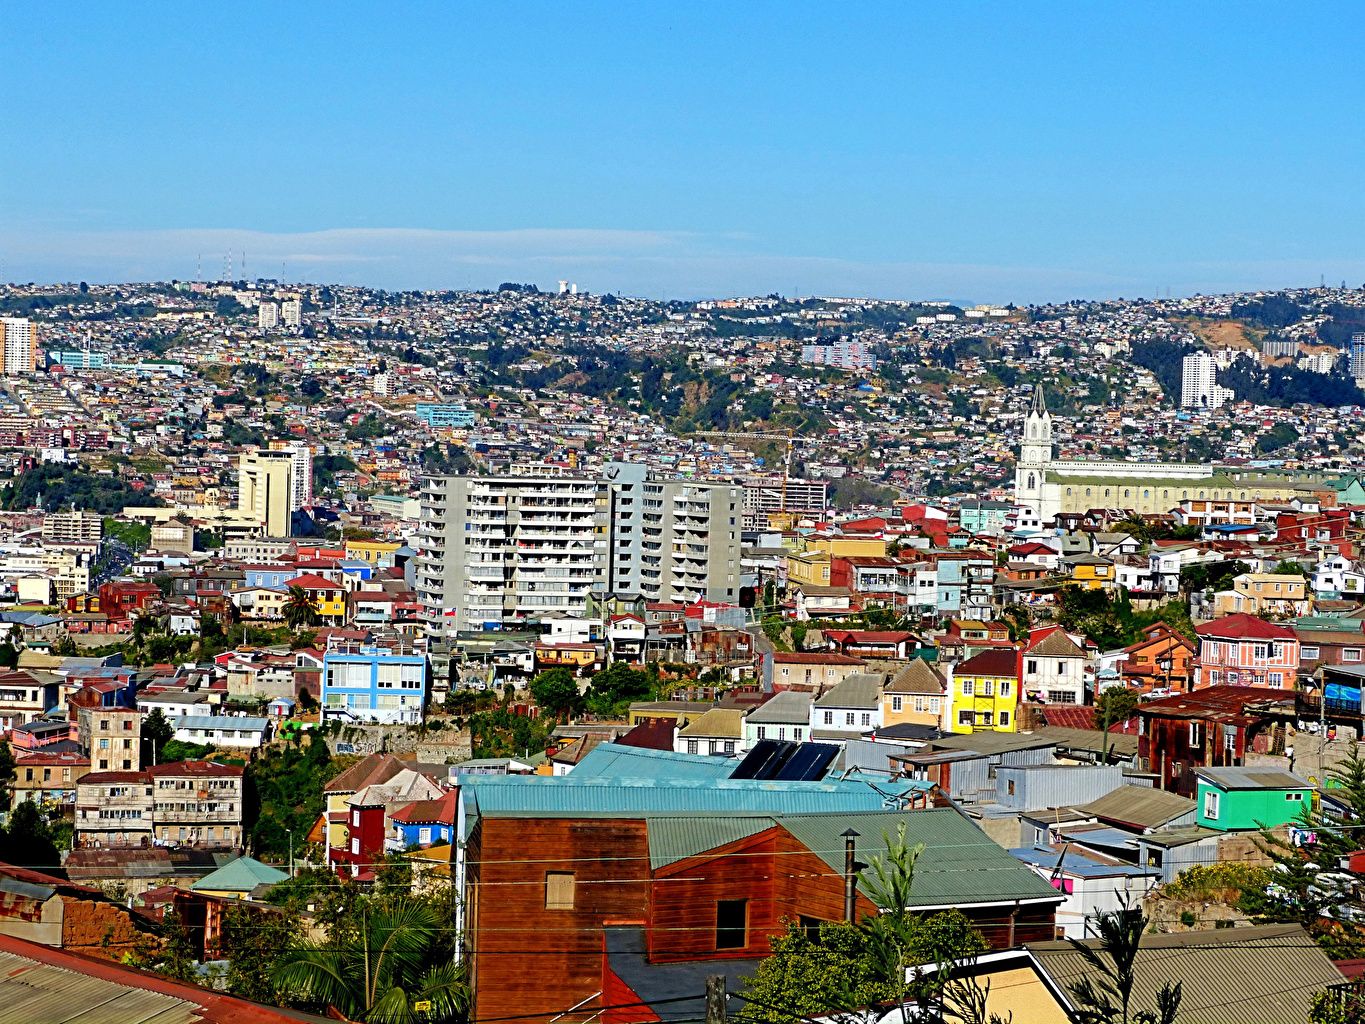 Desktop Wallpaper Chile Valparaiso From above Cities Houses